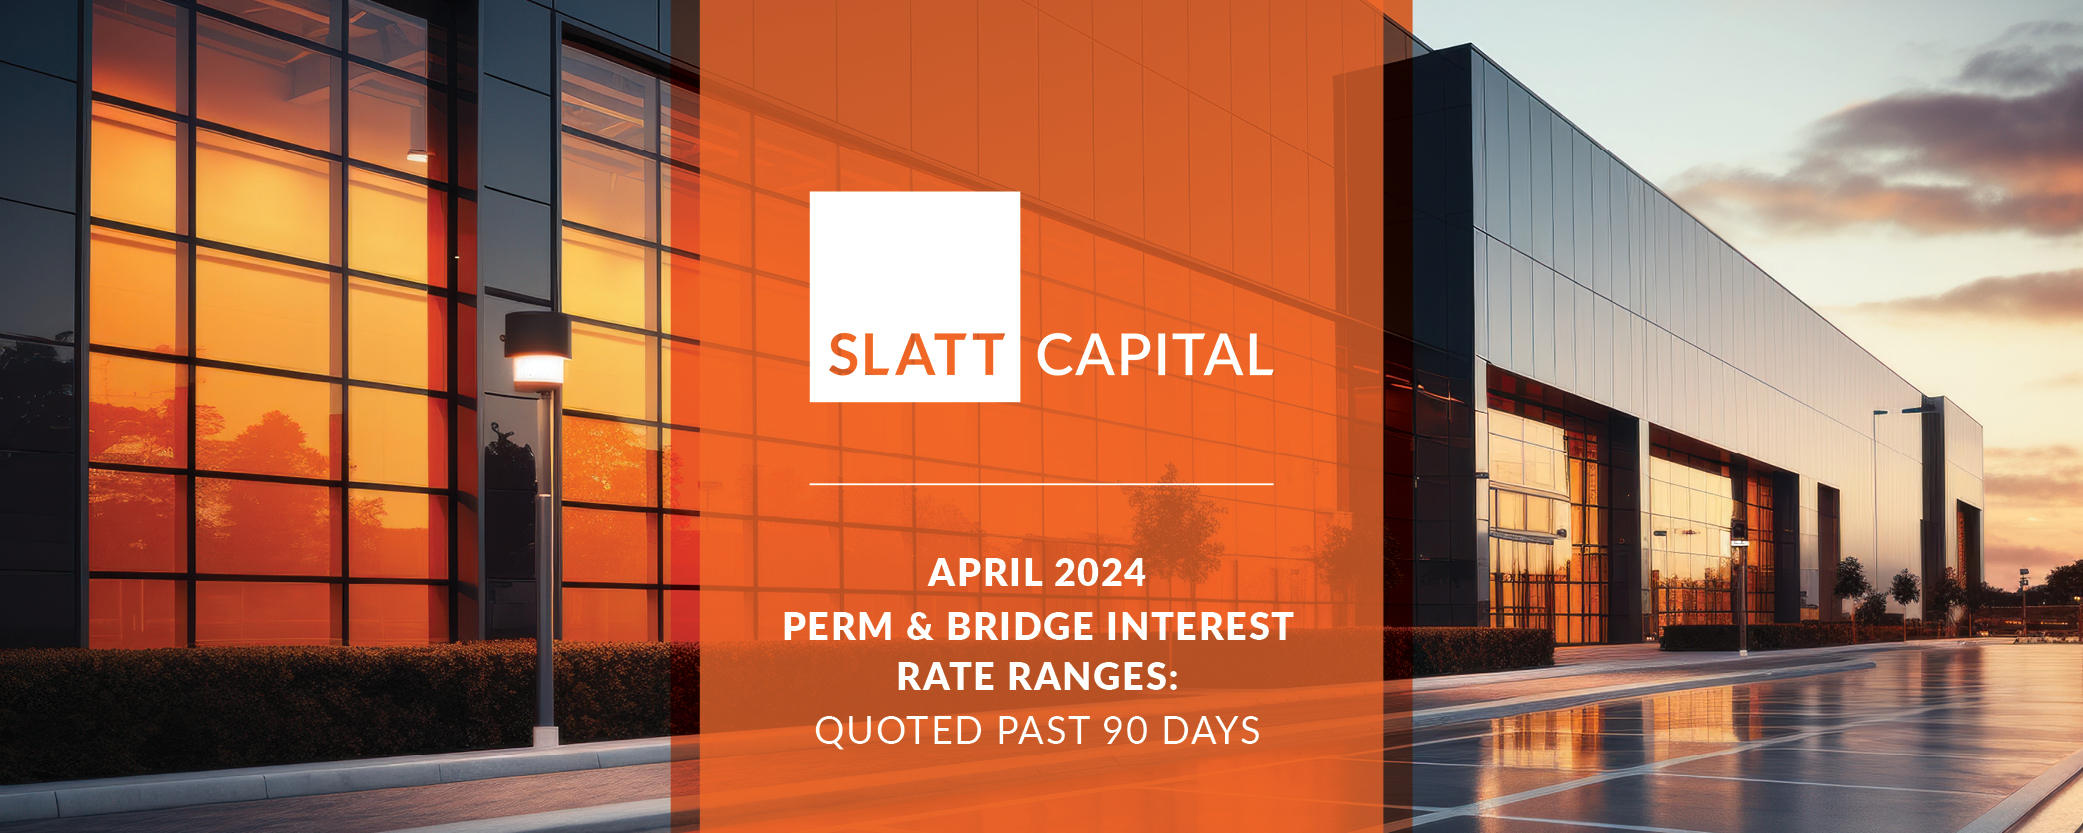 April 2024 interest rate ranges: quoted past 90 days